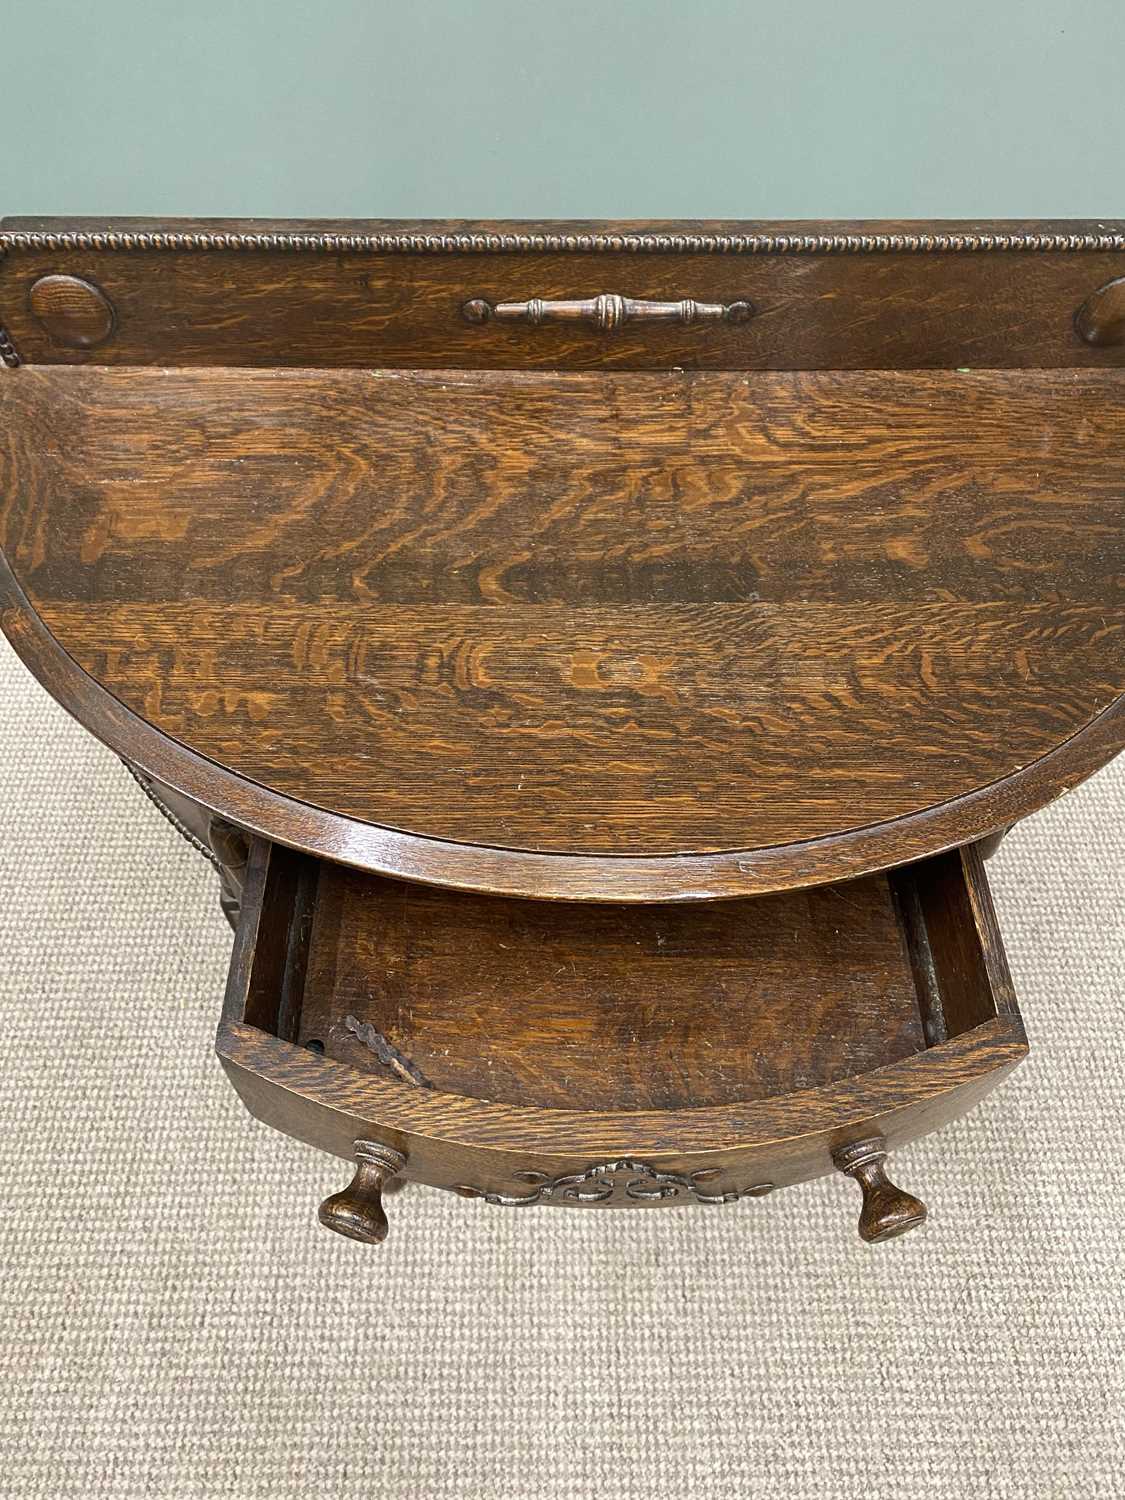 VINTAGE OAK RAILBACK HALF MOON HALL TABLE, single central frieze drawer with turned wooden knobs and - Image 2 of 3